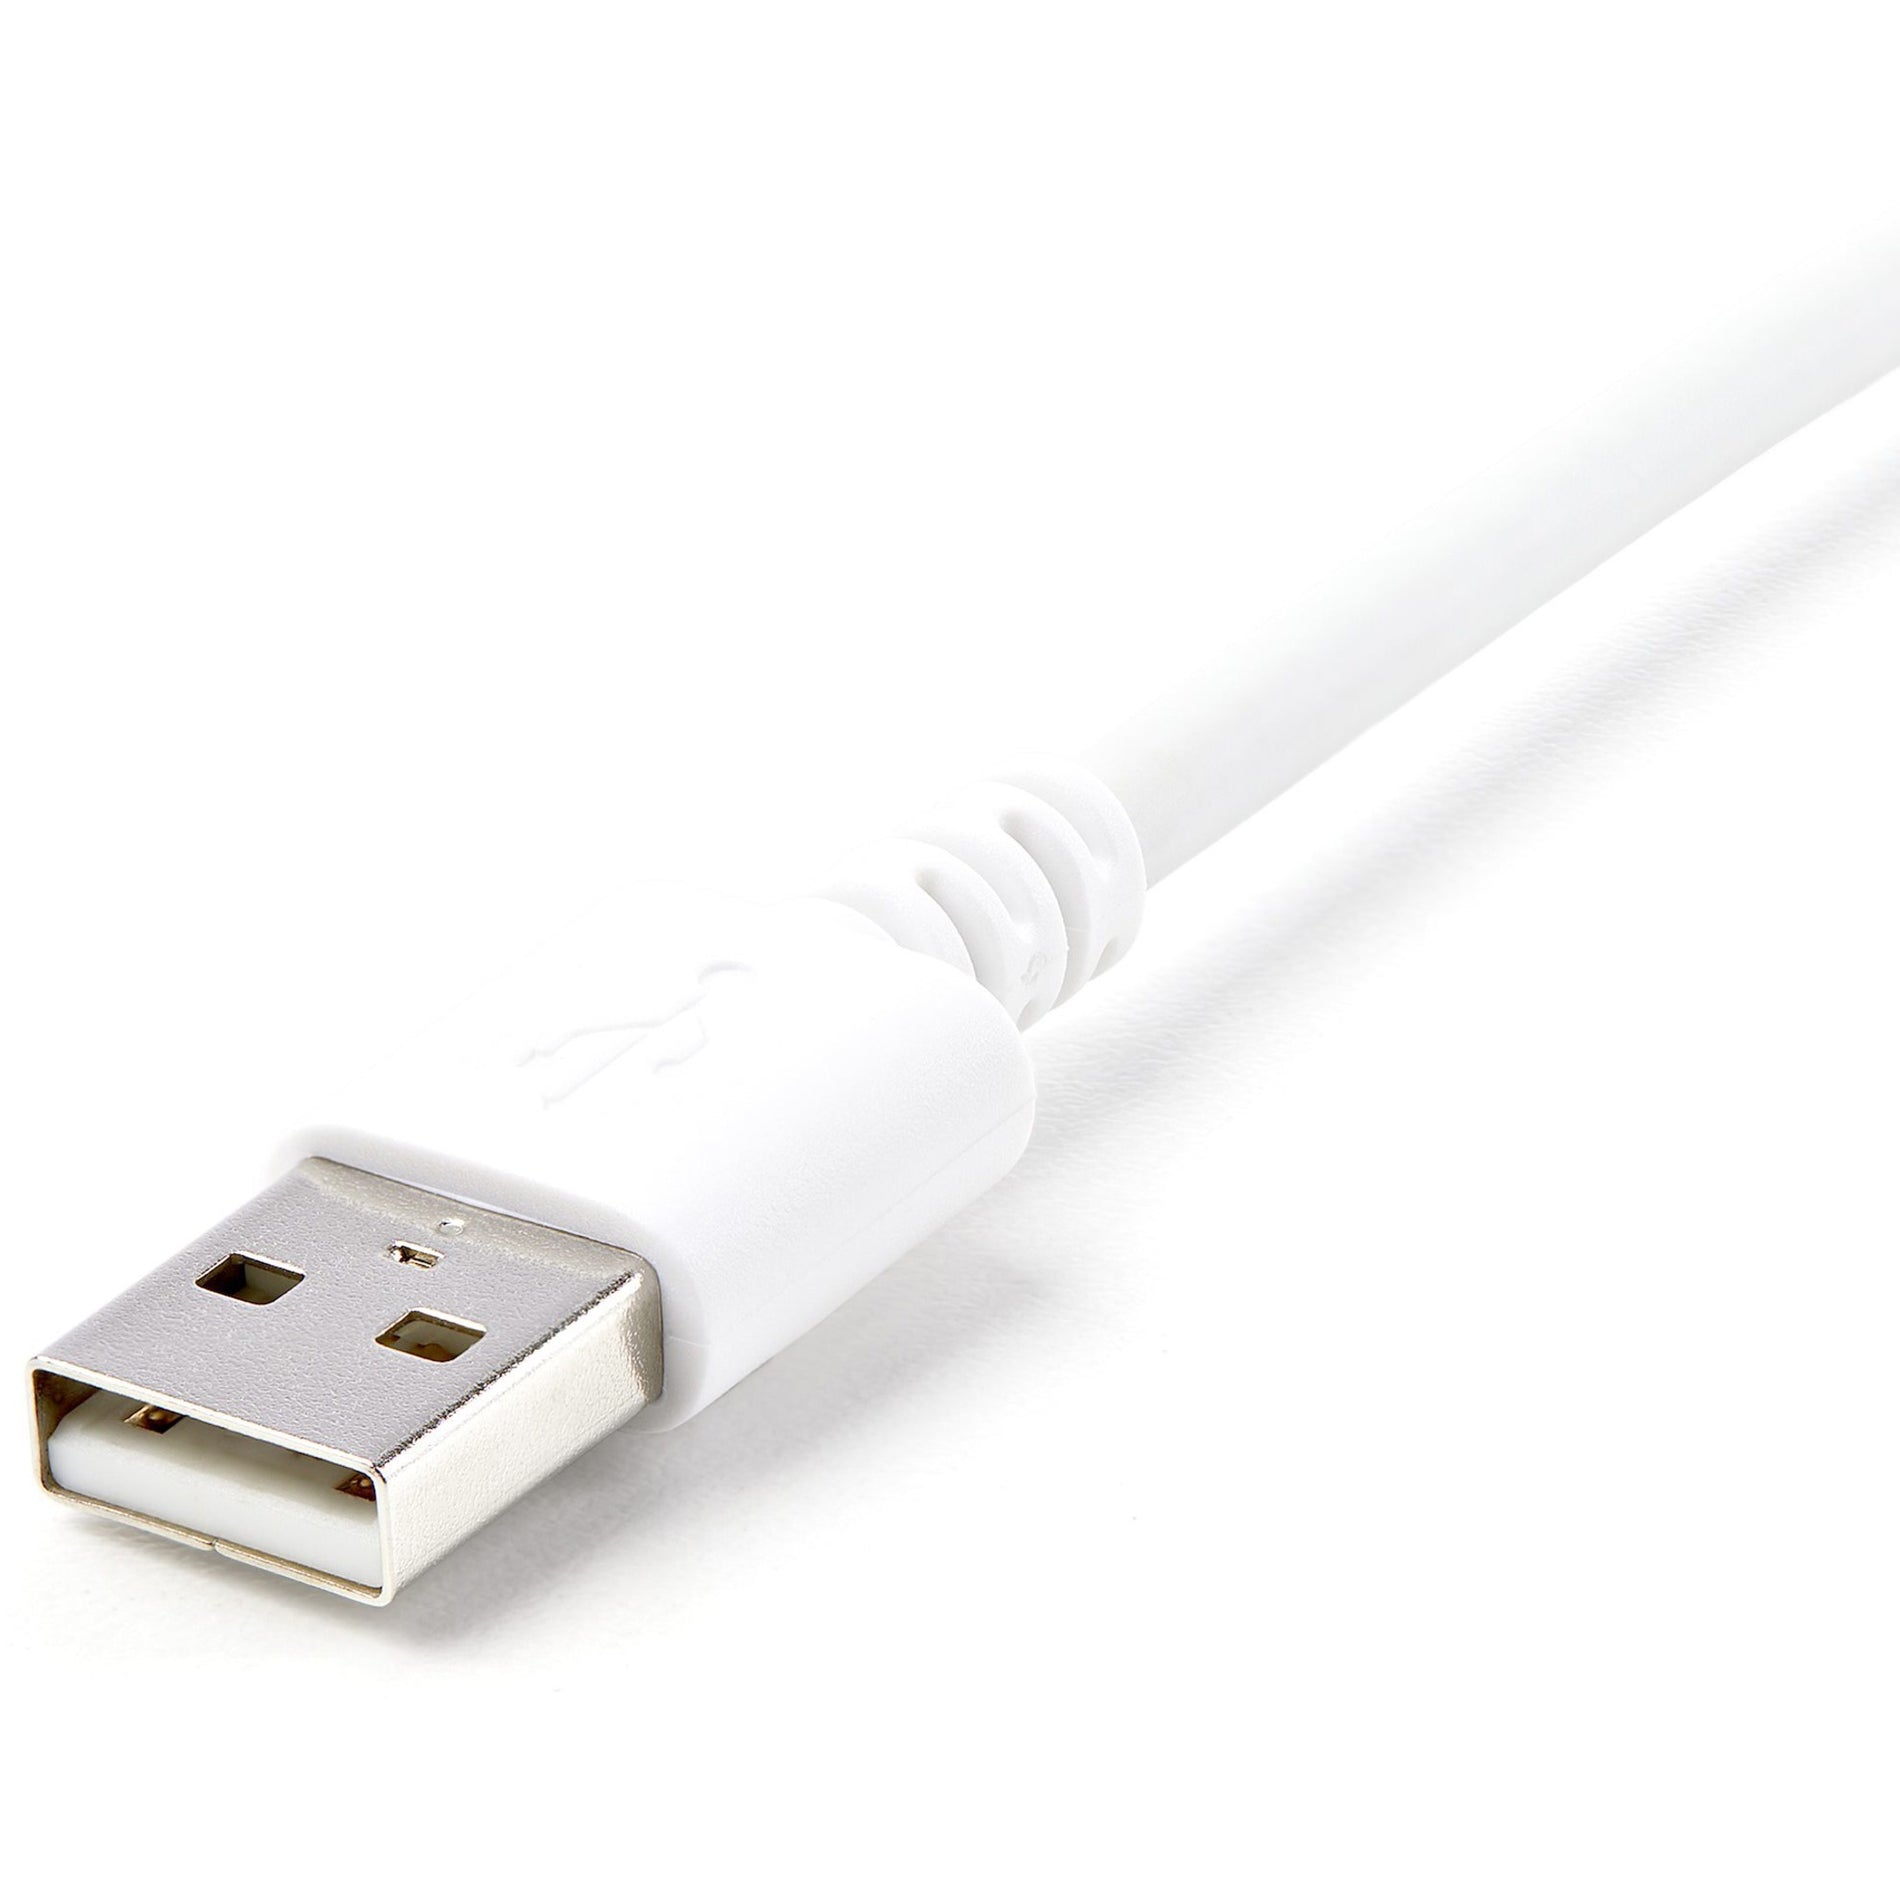 StarTech.com USBLT3MW Sync/Charge Lightning/USB Data Transfer Cable, 9.84 ft, MFI Certified, Reversible, Nickel Connector